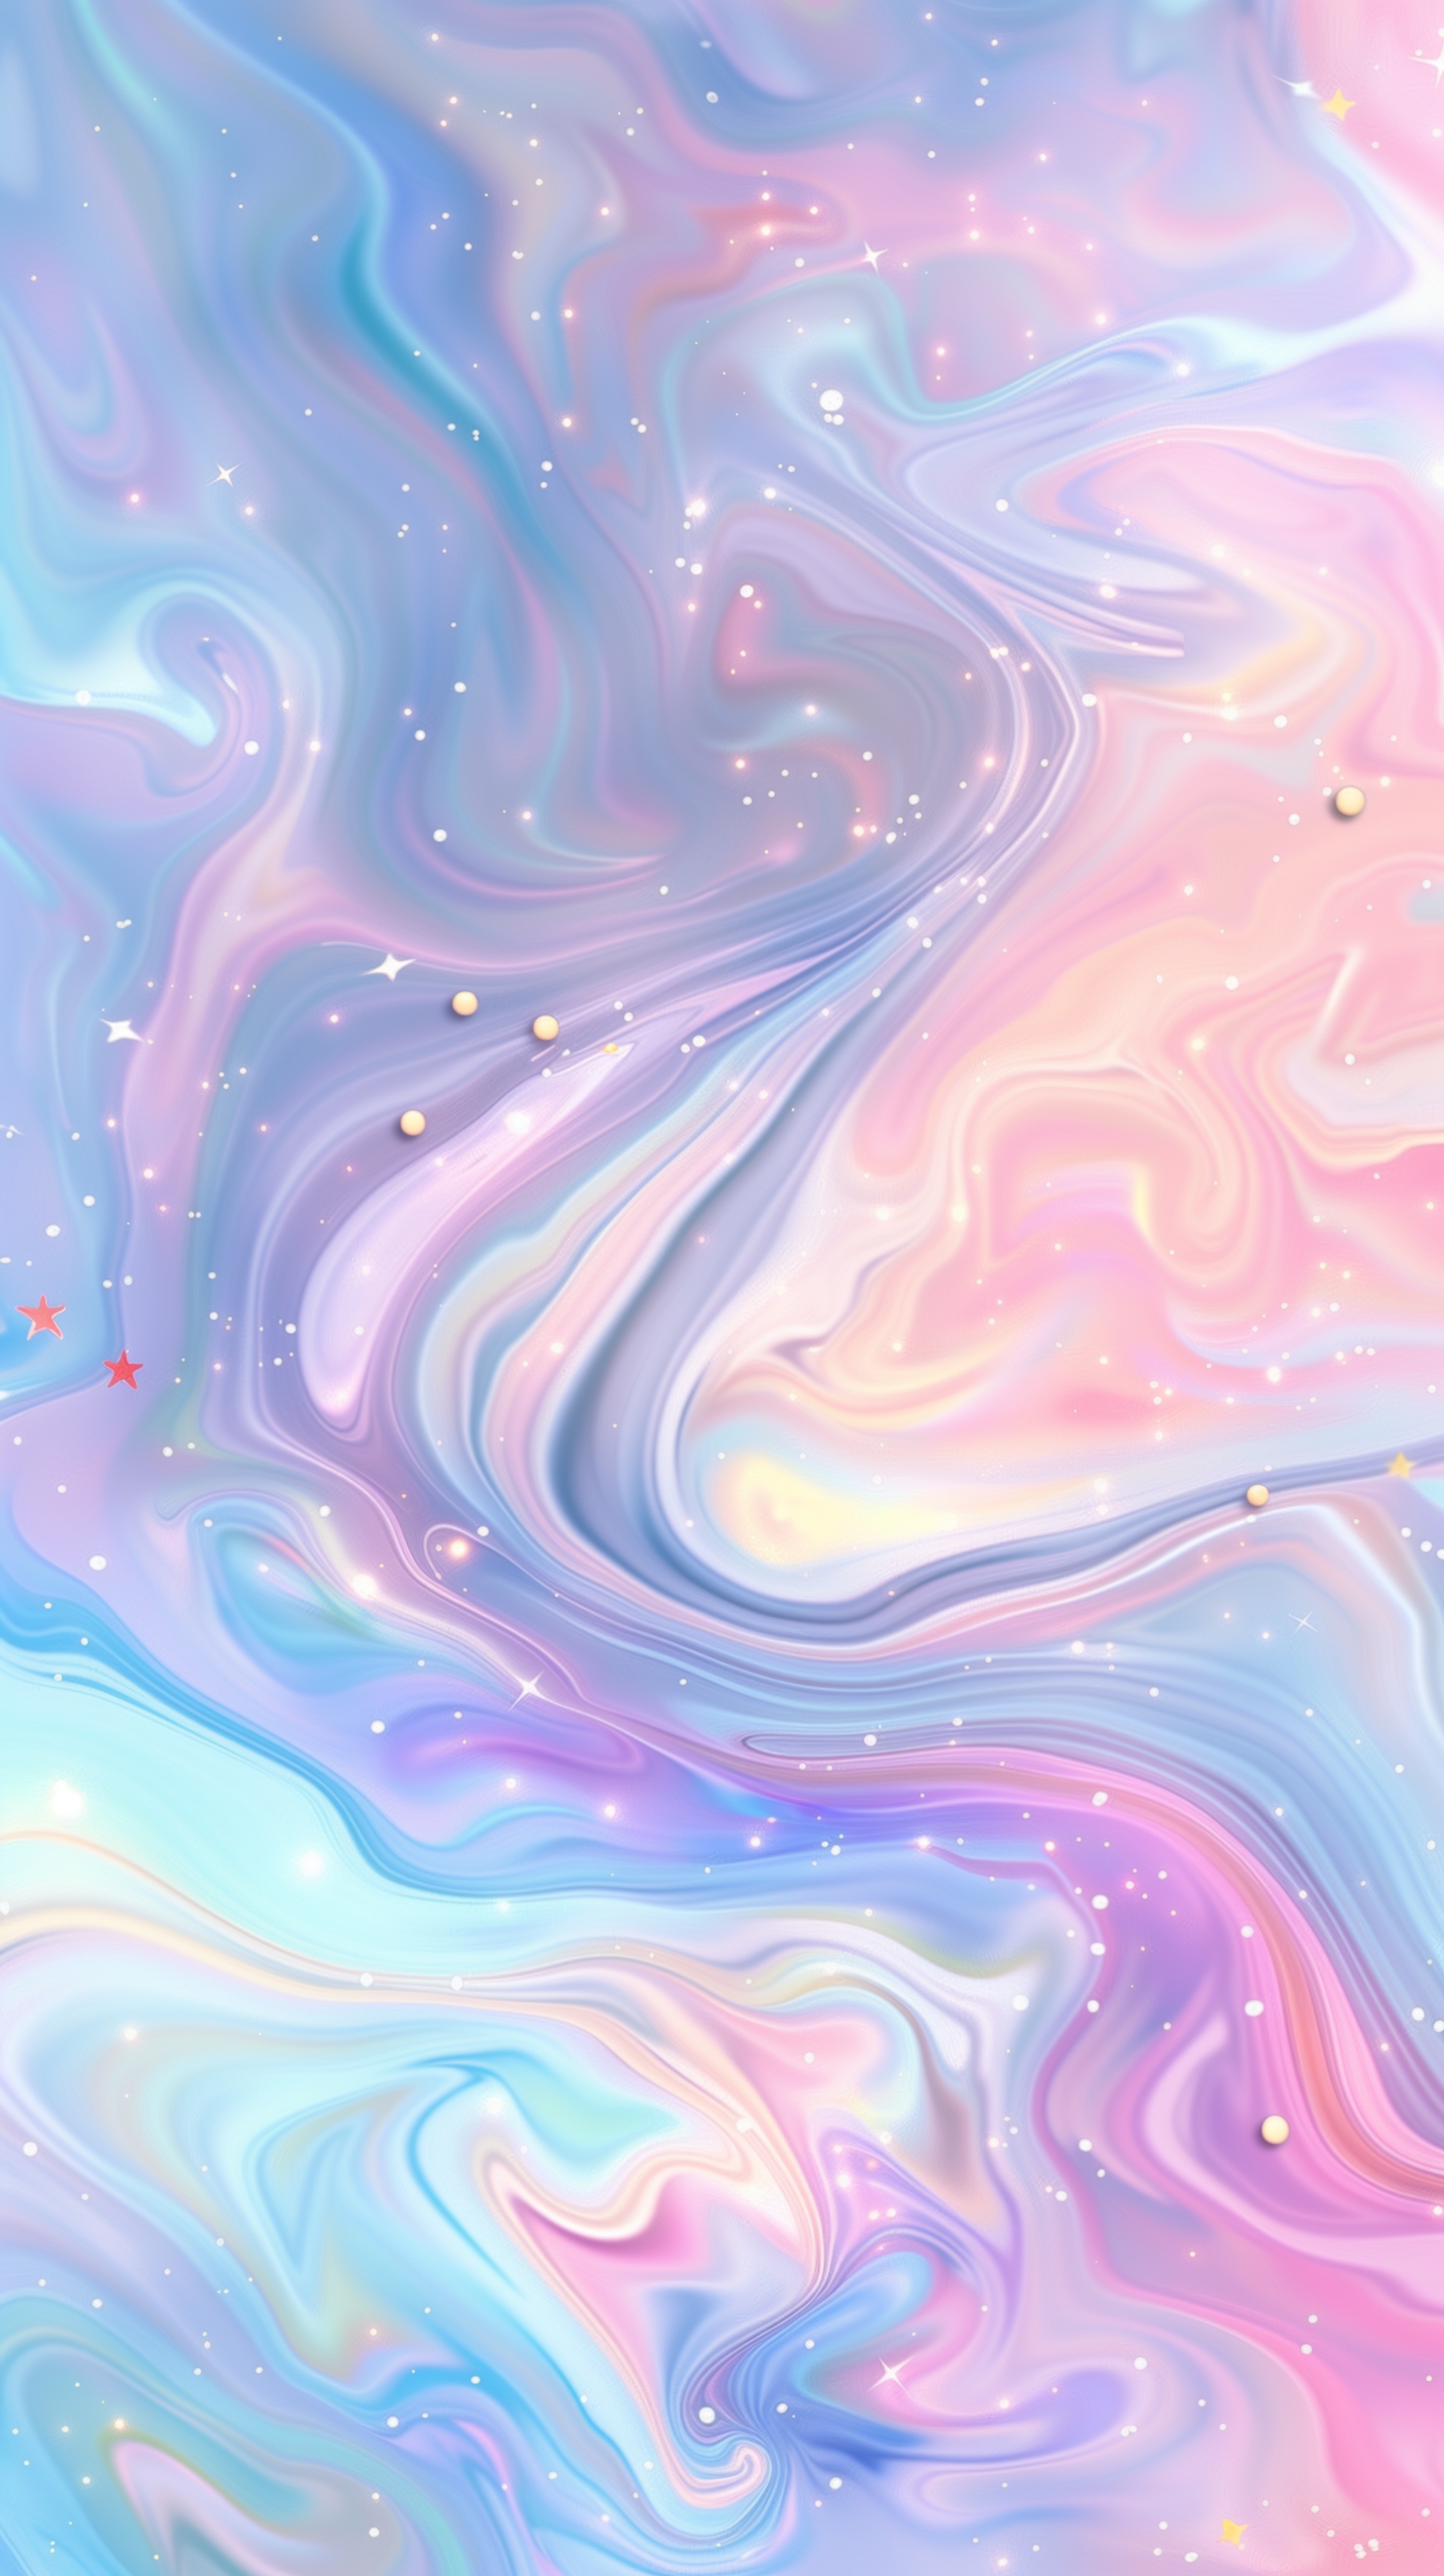 Swirling Pastel Galaxy with Stars Валлпапер[58935a042c3f47169f40]